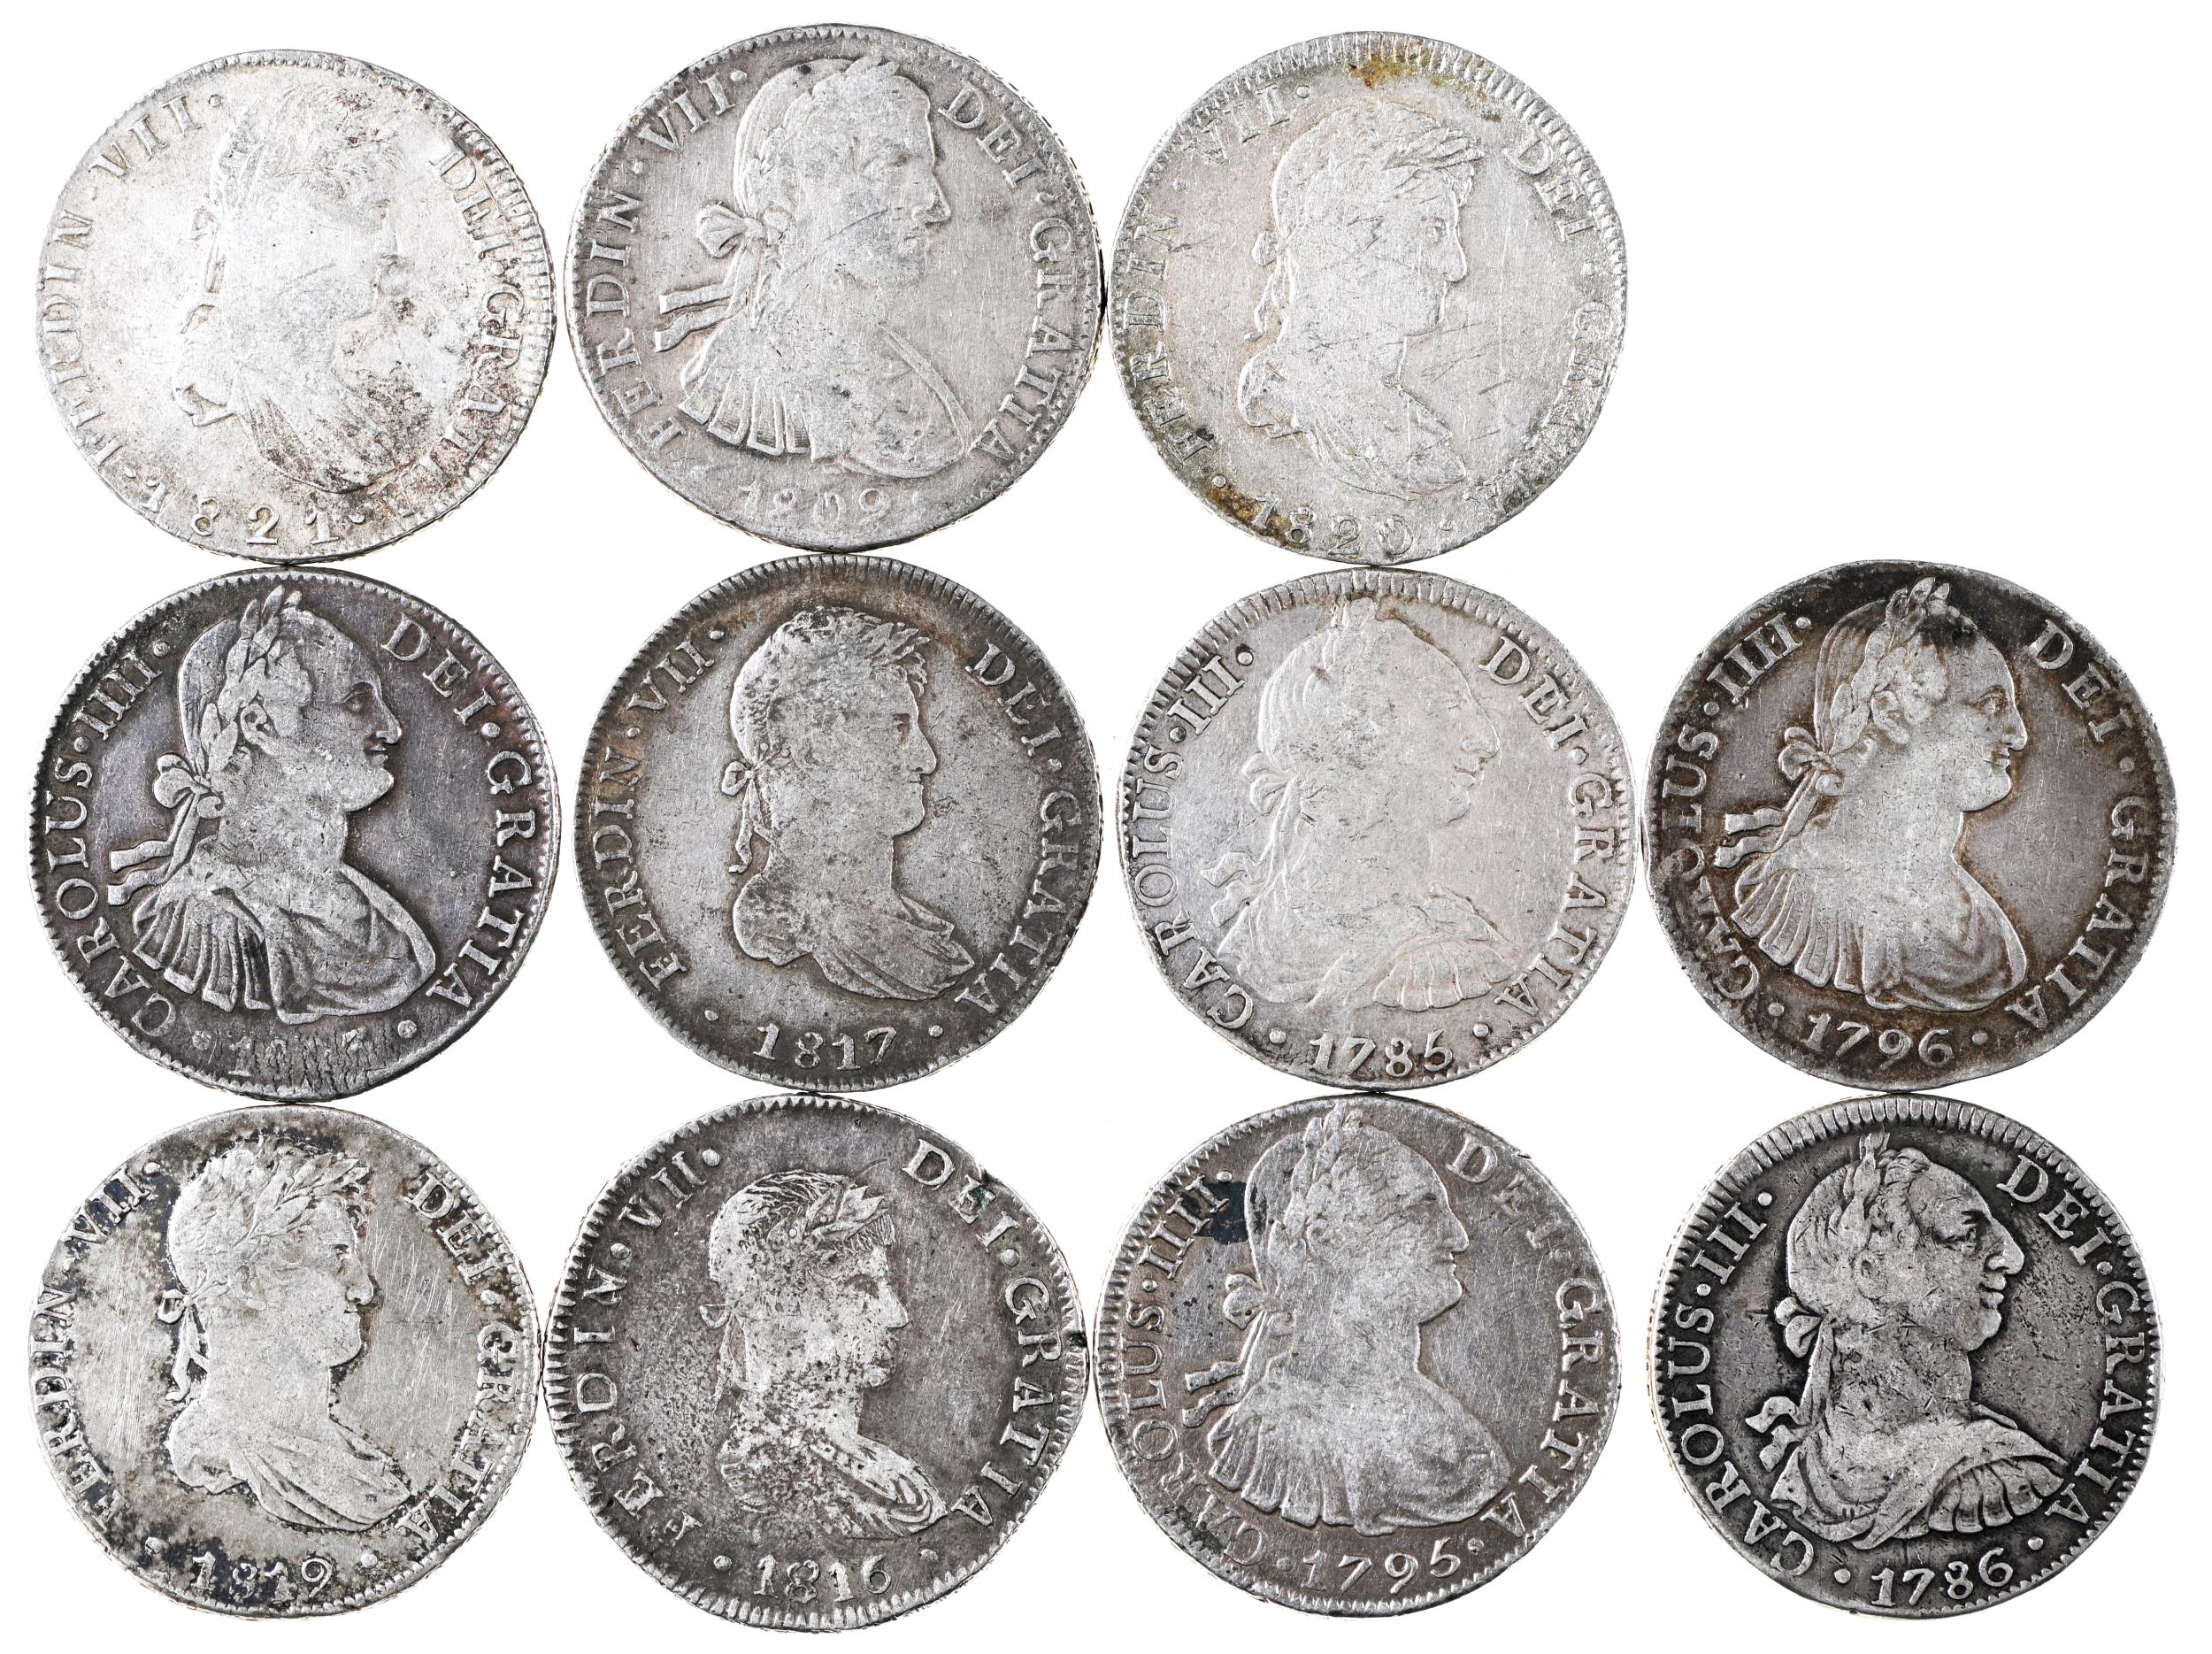 World Silver Crowns, Spanish Empire, Mexico, 8 Reales, mainly Mexico City, 1795, 1789, 1796, 1809,